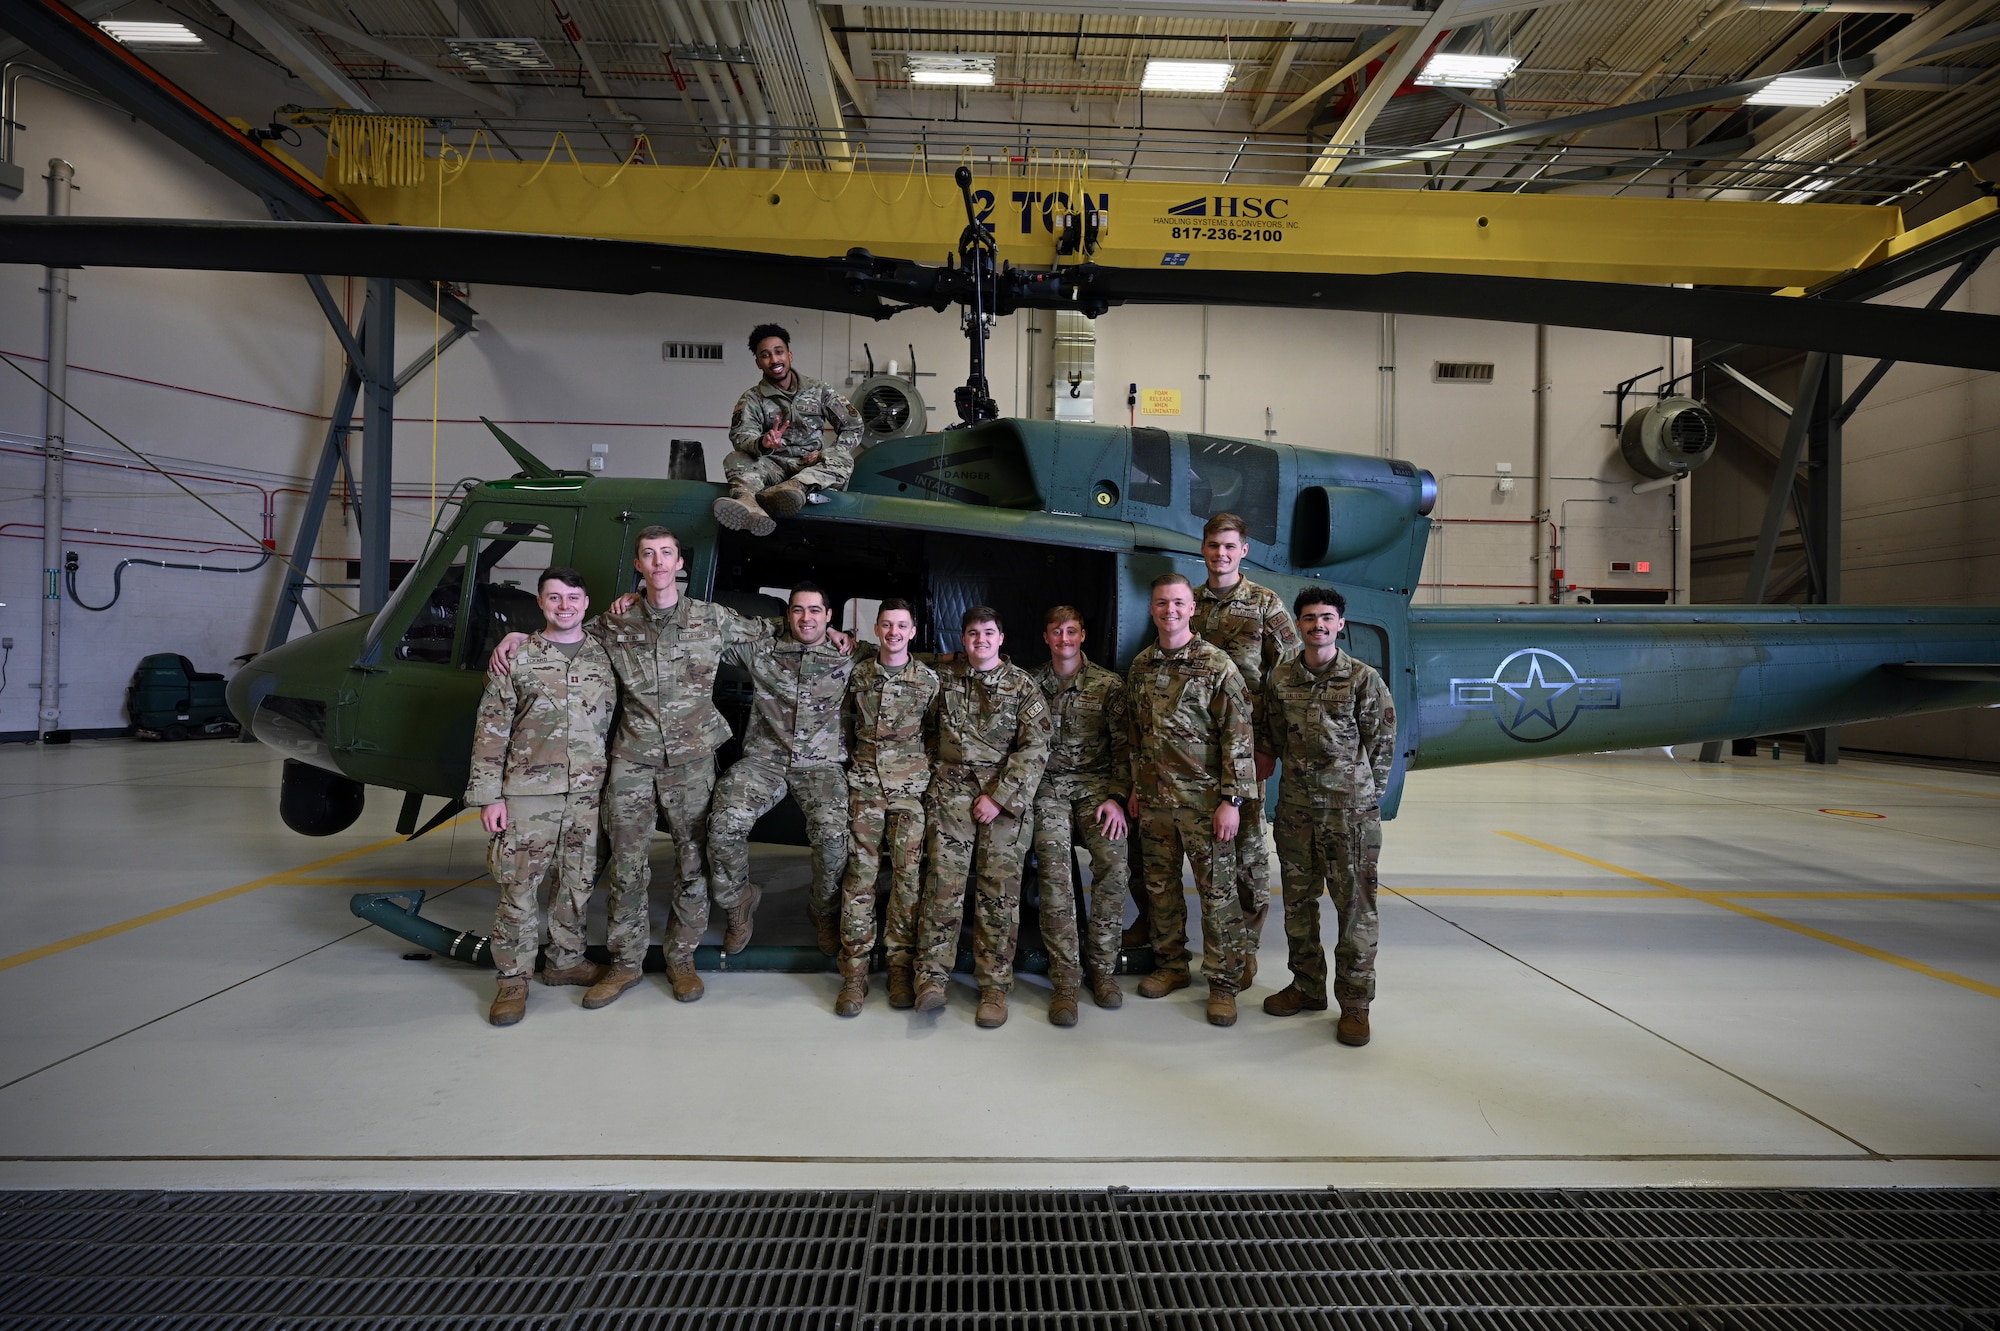 A group of ten uniformed military members stand next to a green helicopter in an aircraft hangar.